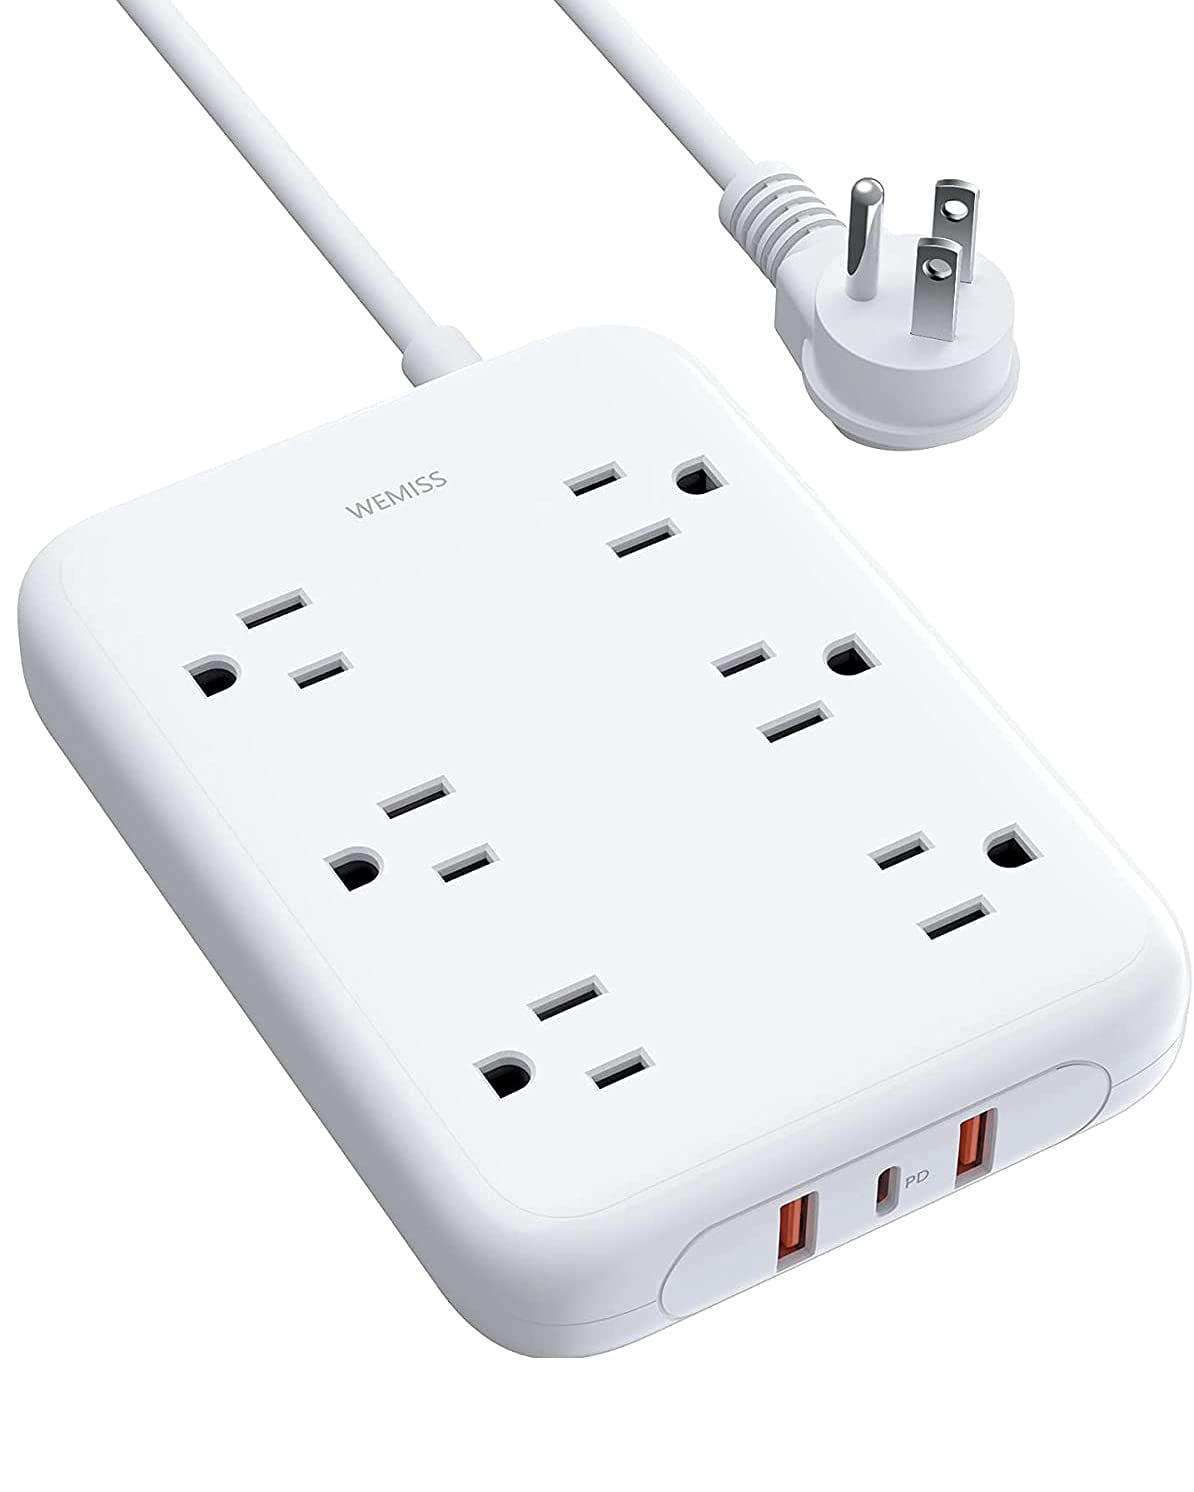 Multi Outlets 3 USB Surge Protector Power Strip with Flat Plug Extension Cord